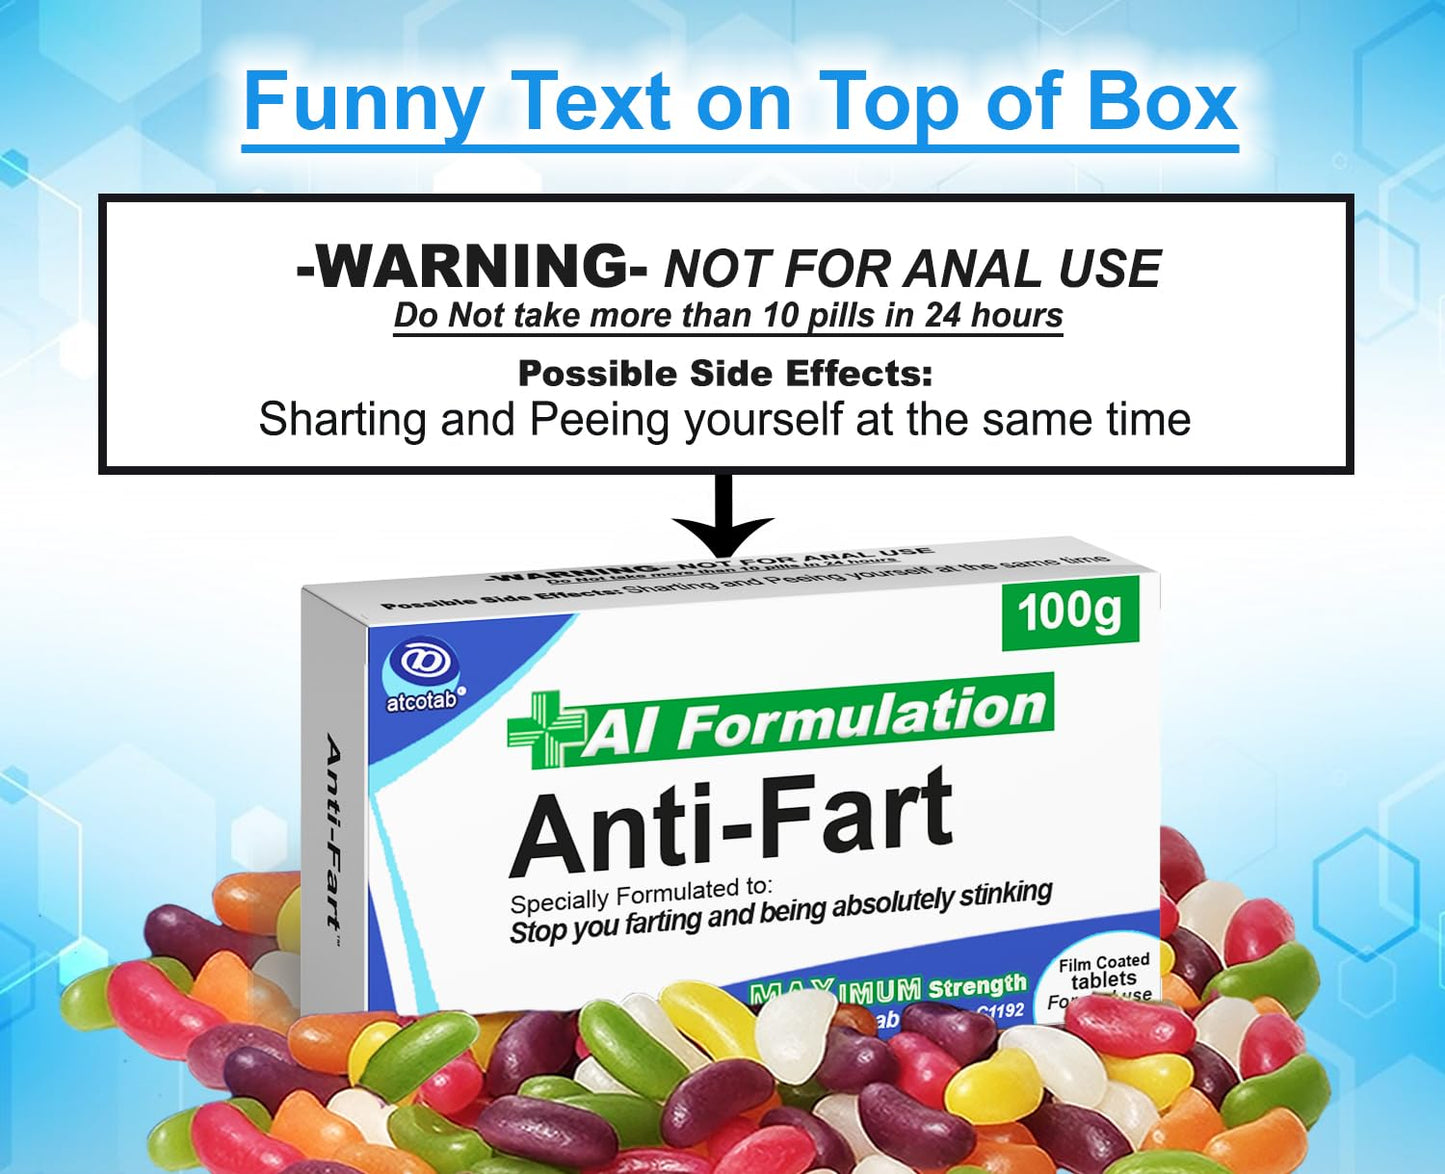 Funny Rude Joke Tablets Pill Box Prank Includes Jelly Beans Sweets Unusual Gift for Men Father's Day Him Her April Fools Day Easter Birthday Gifts for Women Presents for Dad Boyfriend